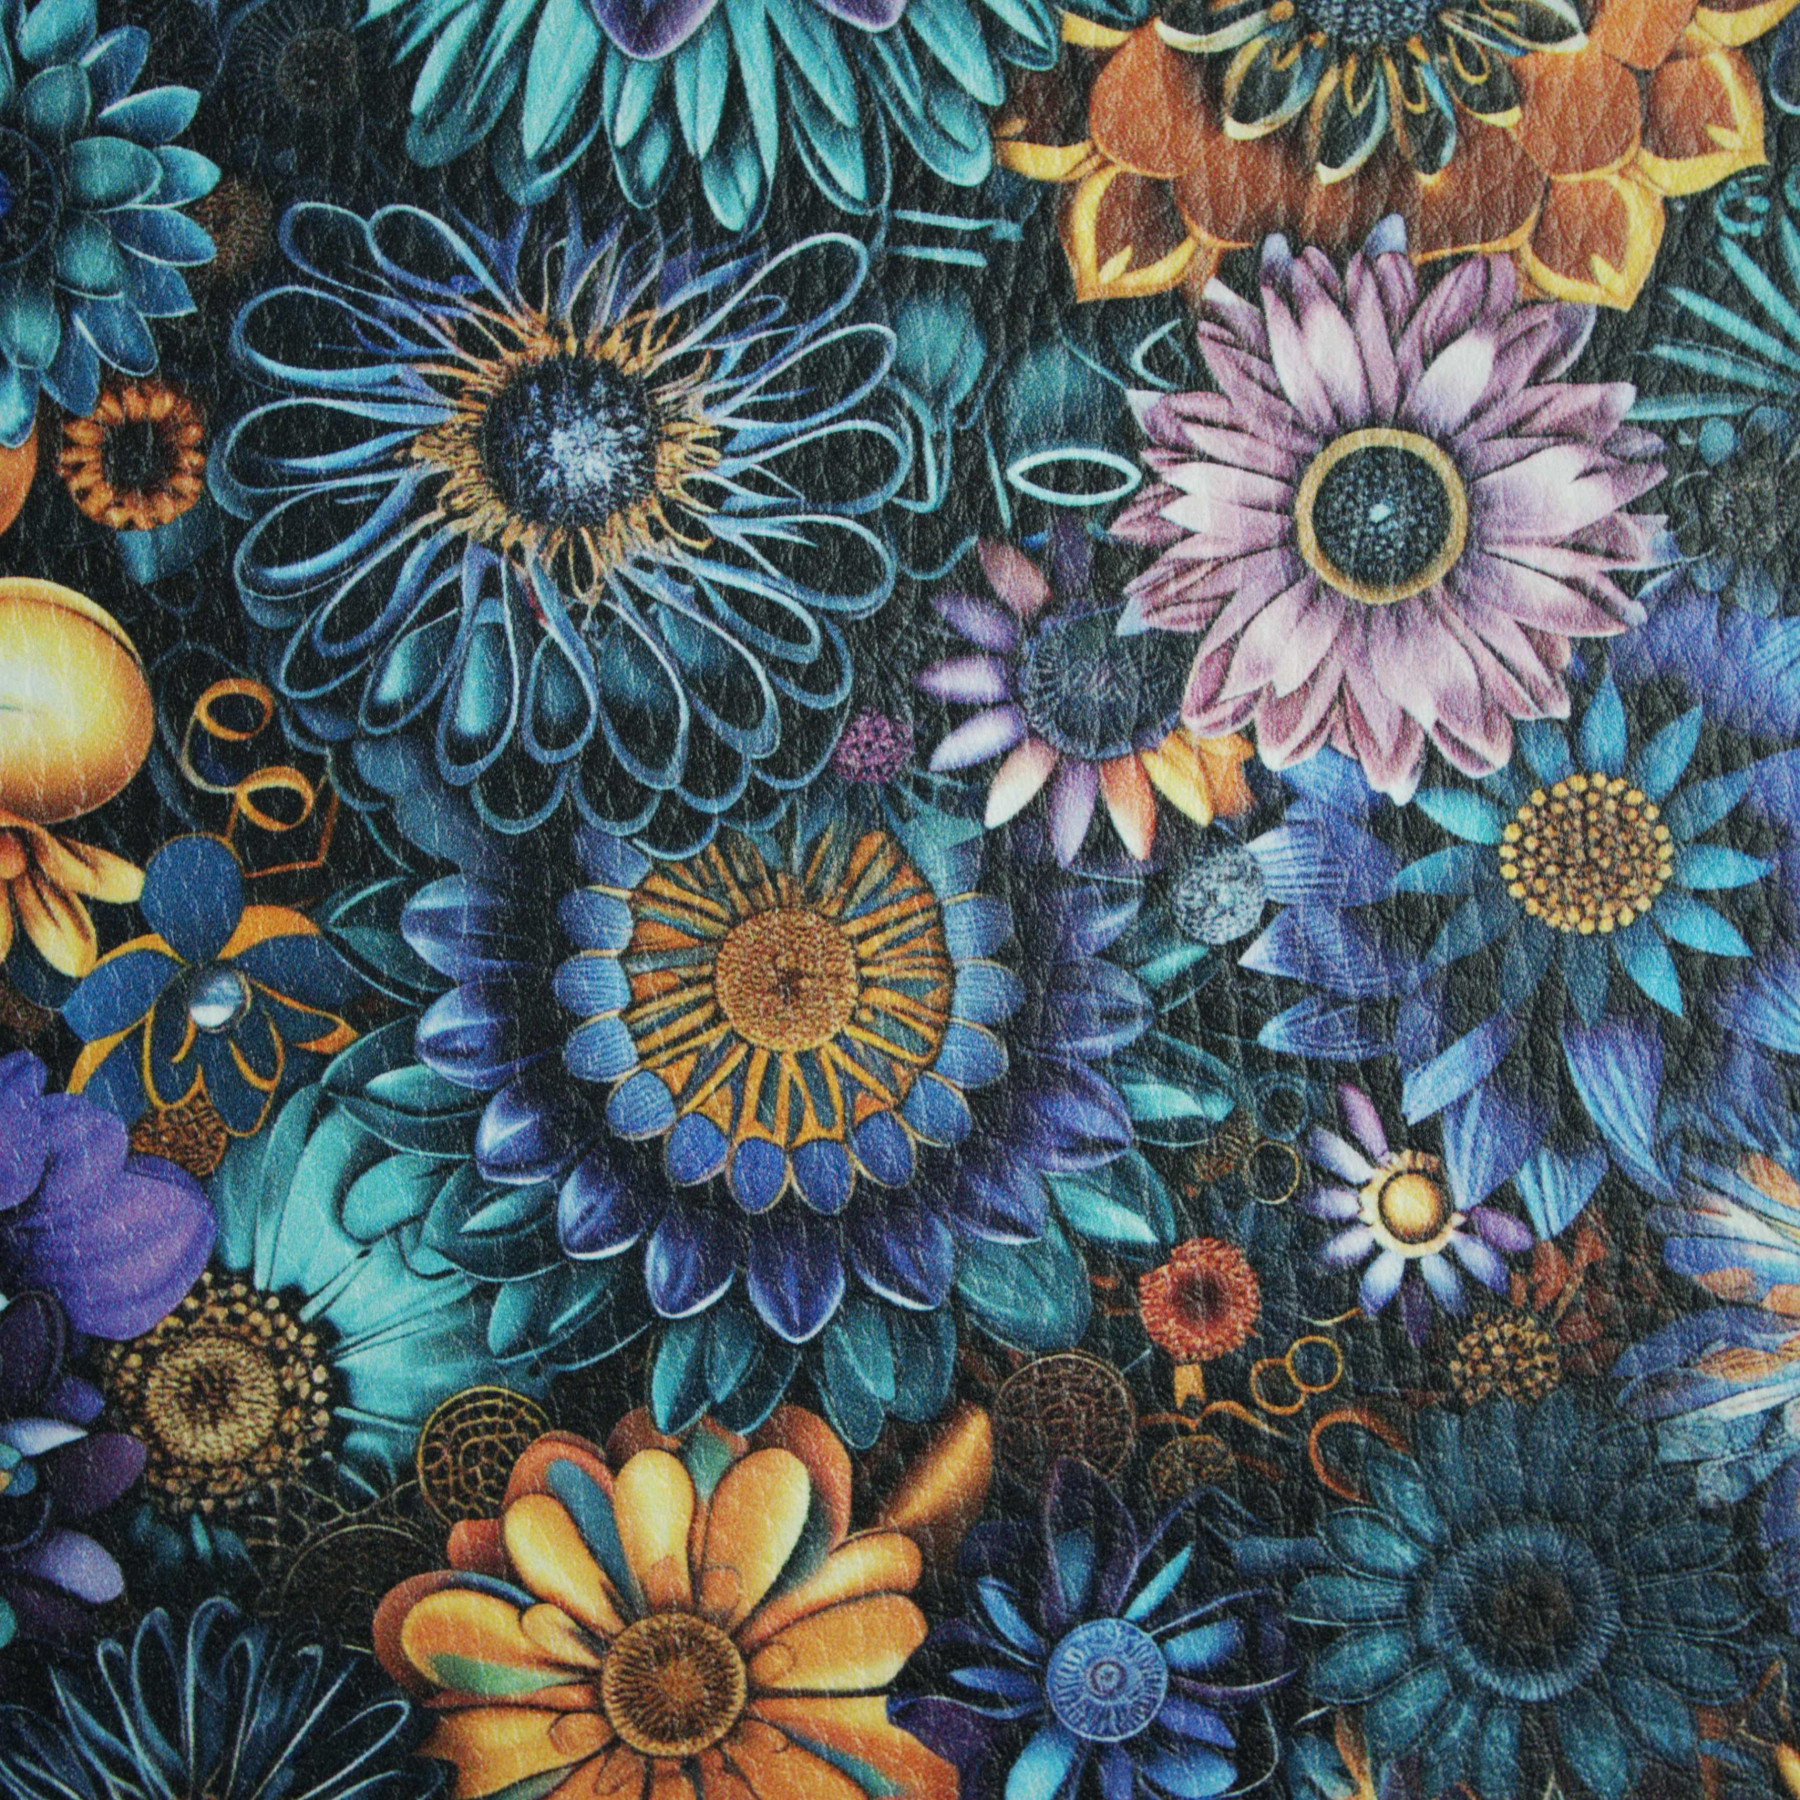 COLORFUL GERBERA (46 cm x 50 cm) - thick pressed leatherette